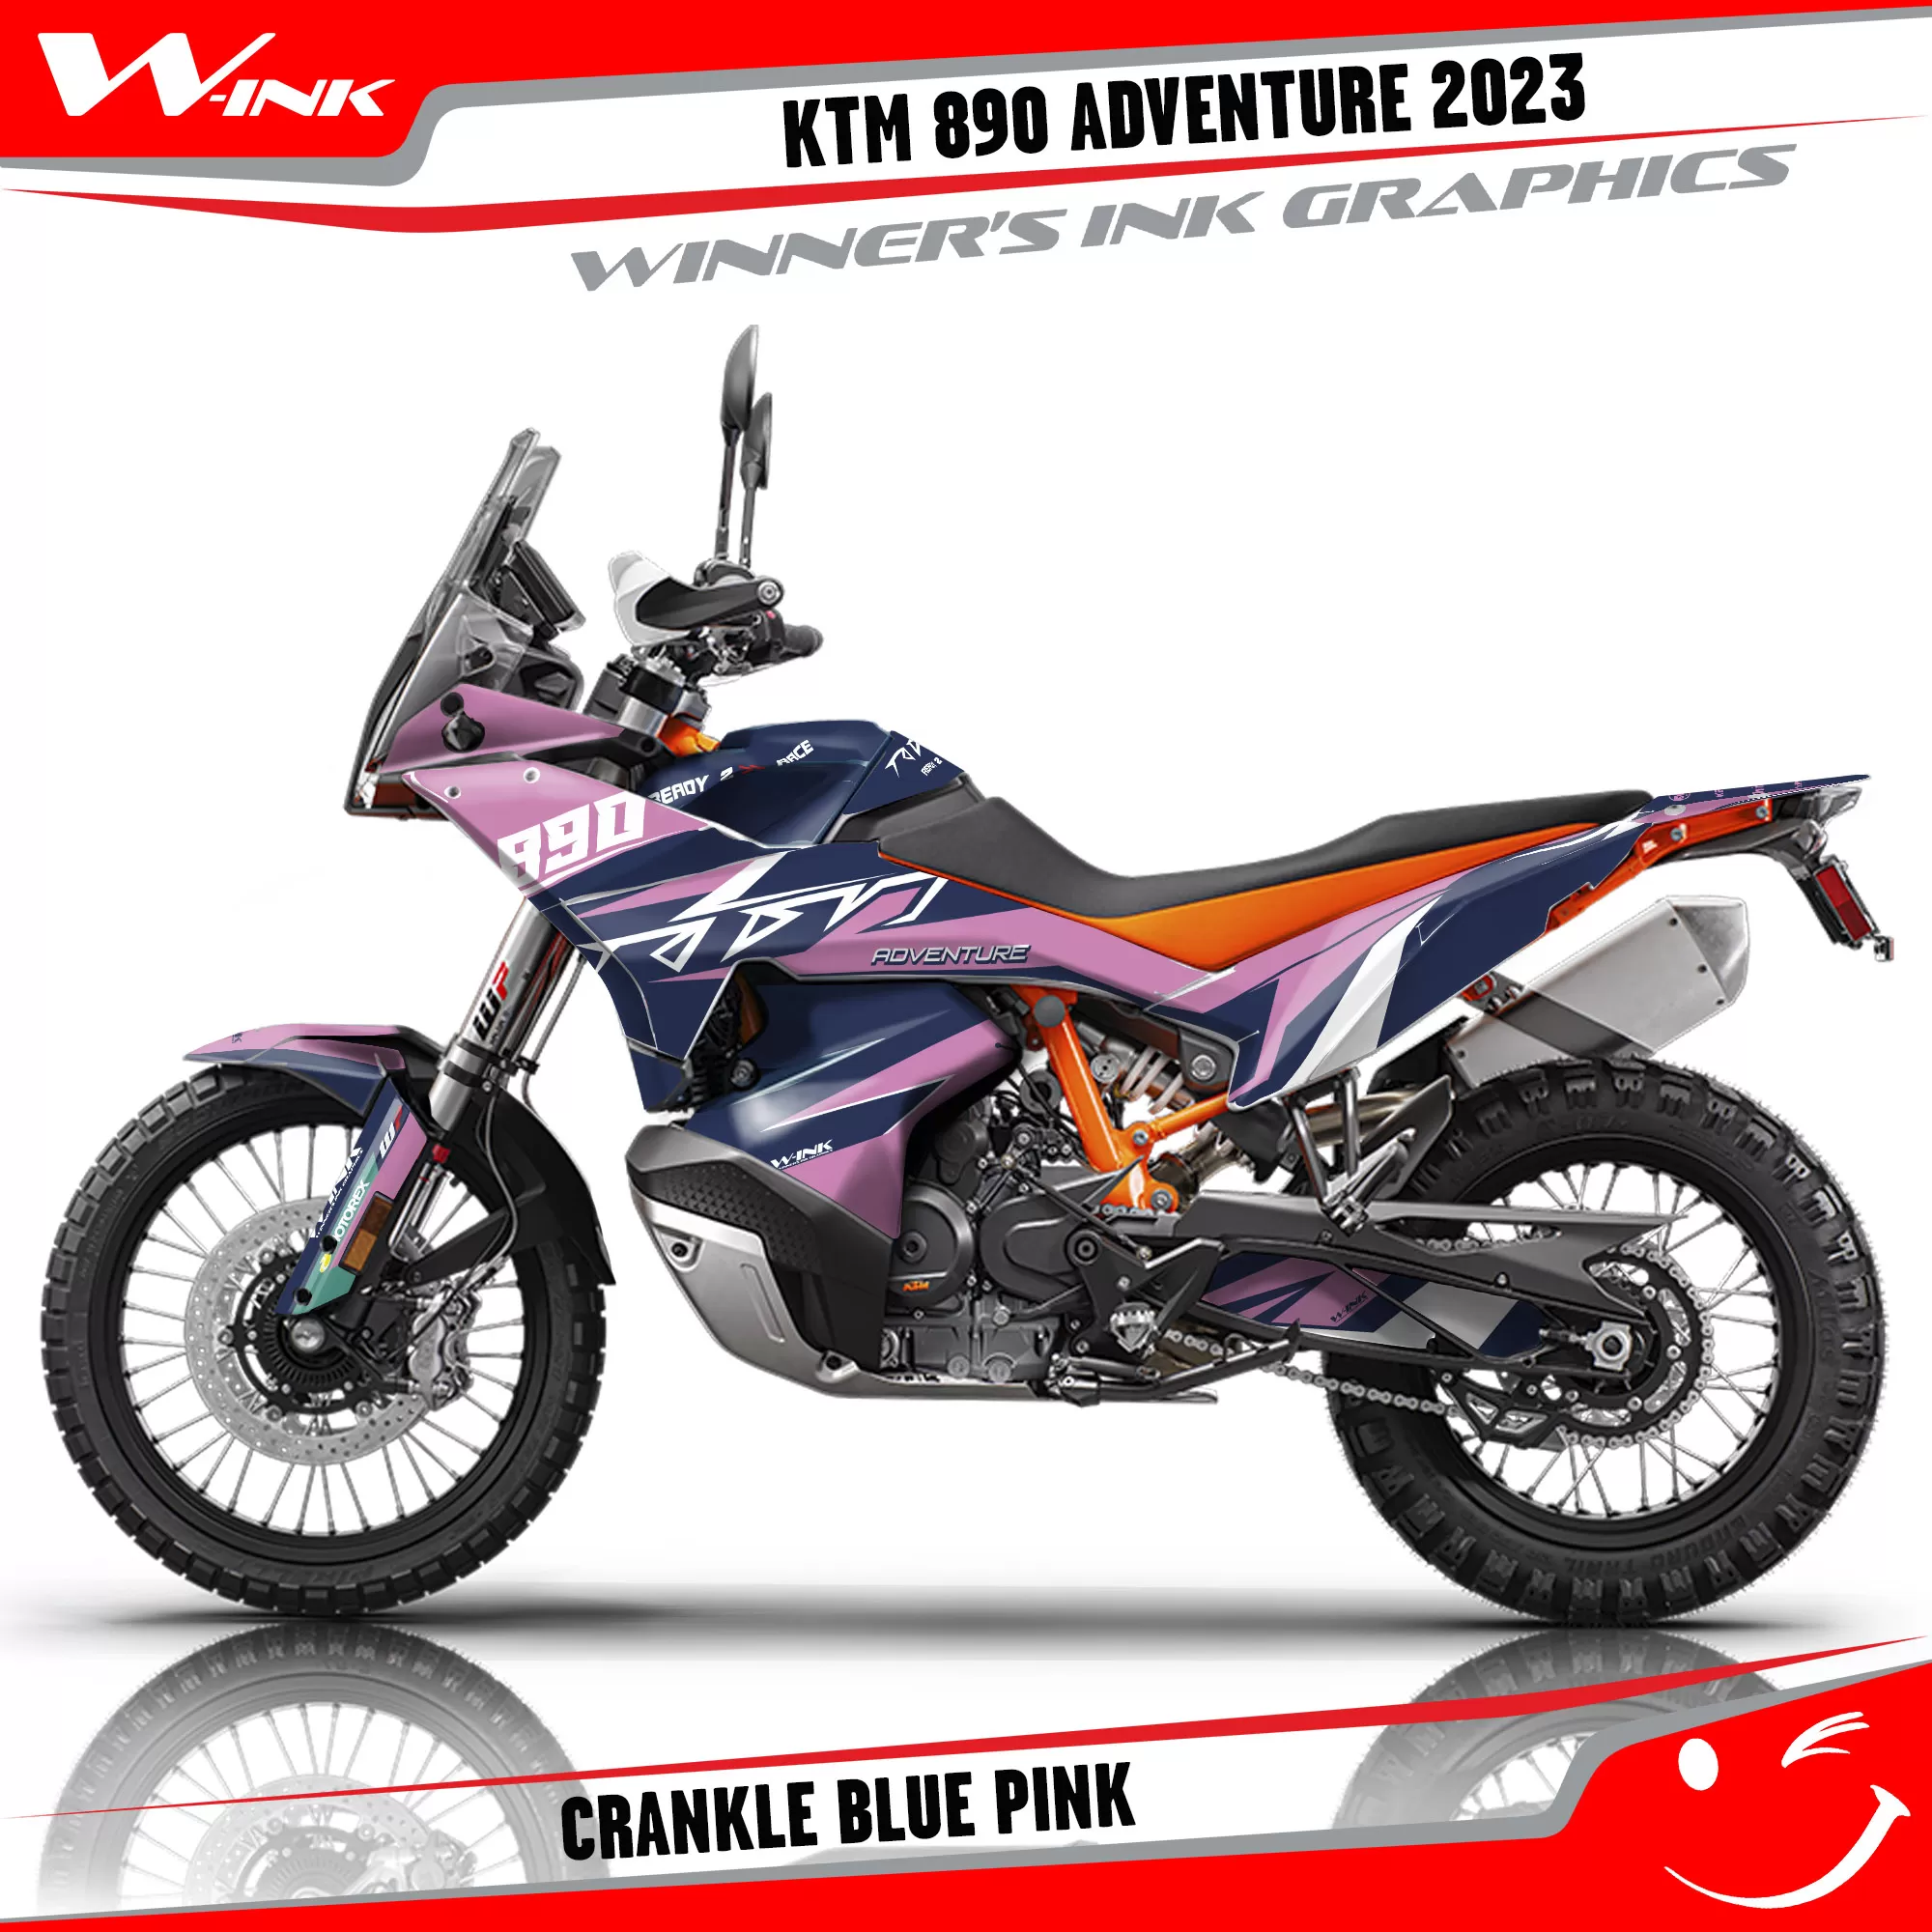 Adventure-890-2023-graphics-kit-and-decals-with-design-Crankle-Blue-Pink